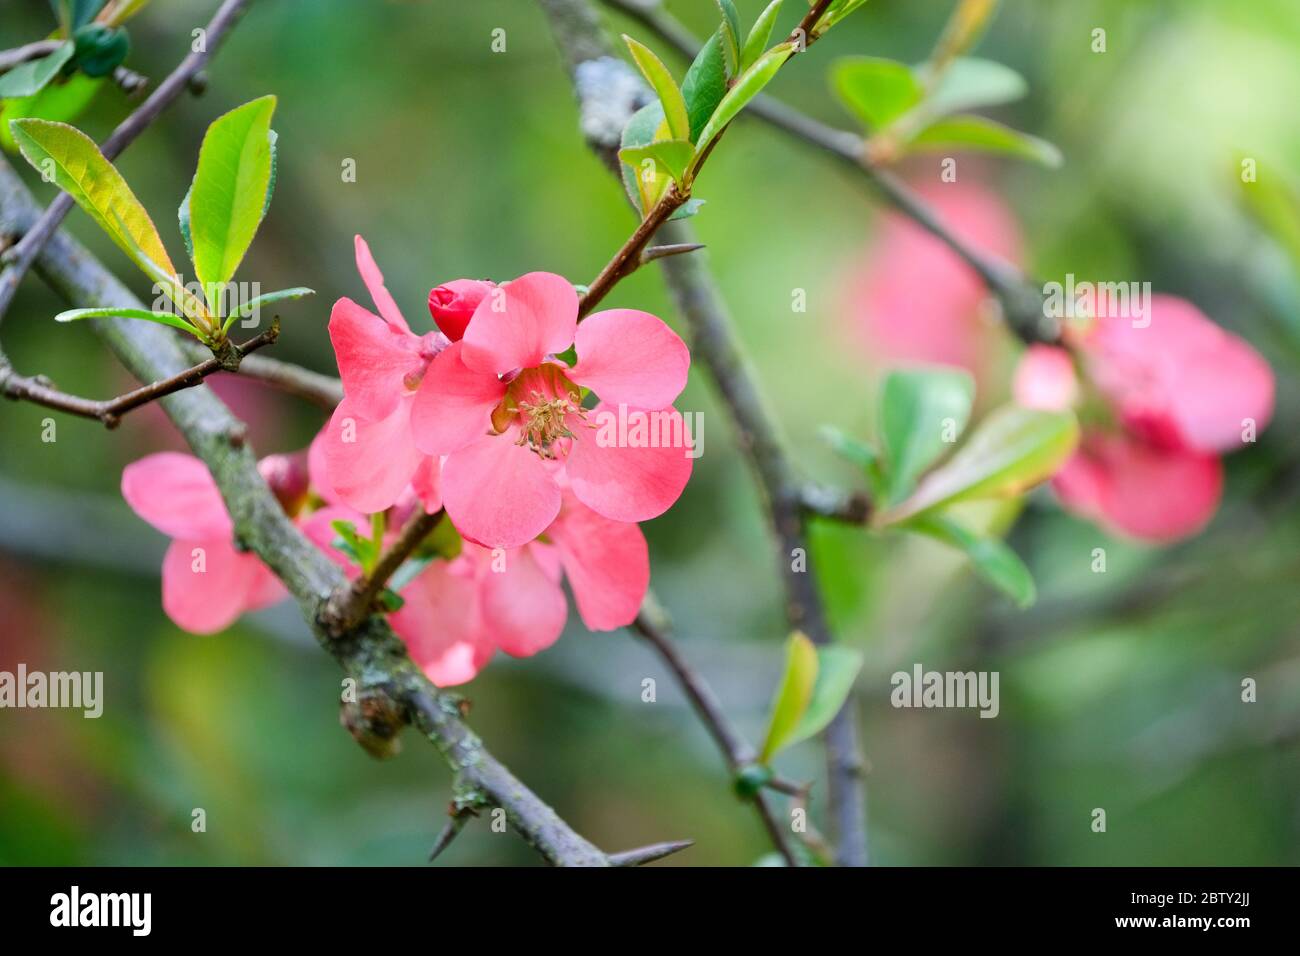 Chaenomeles Superba 'Pink Lady'. Japanese Quince 'Pink Lady', flowering quince Stock Photo